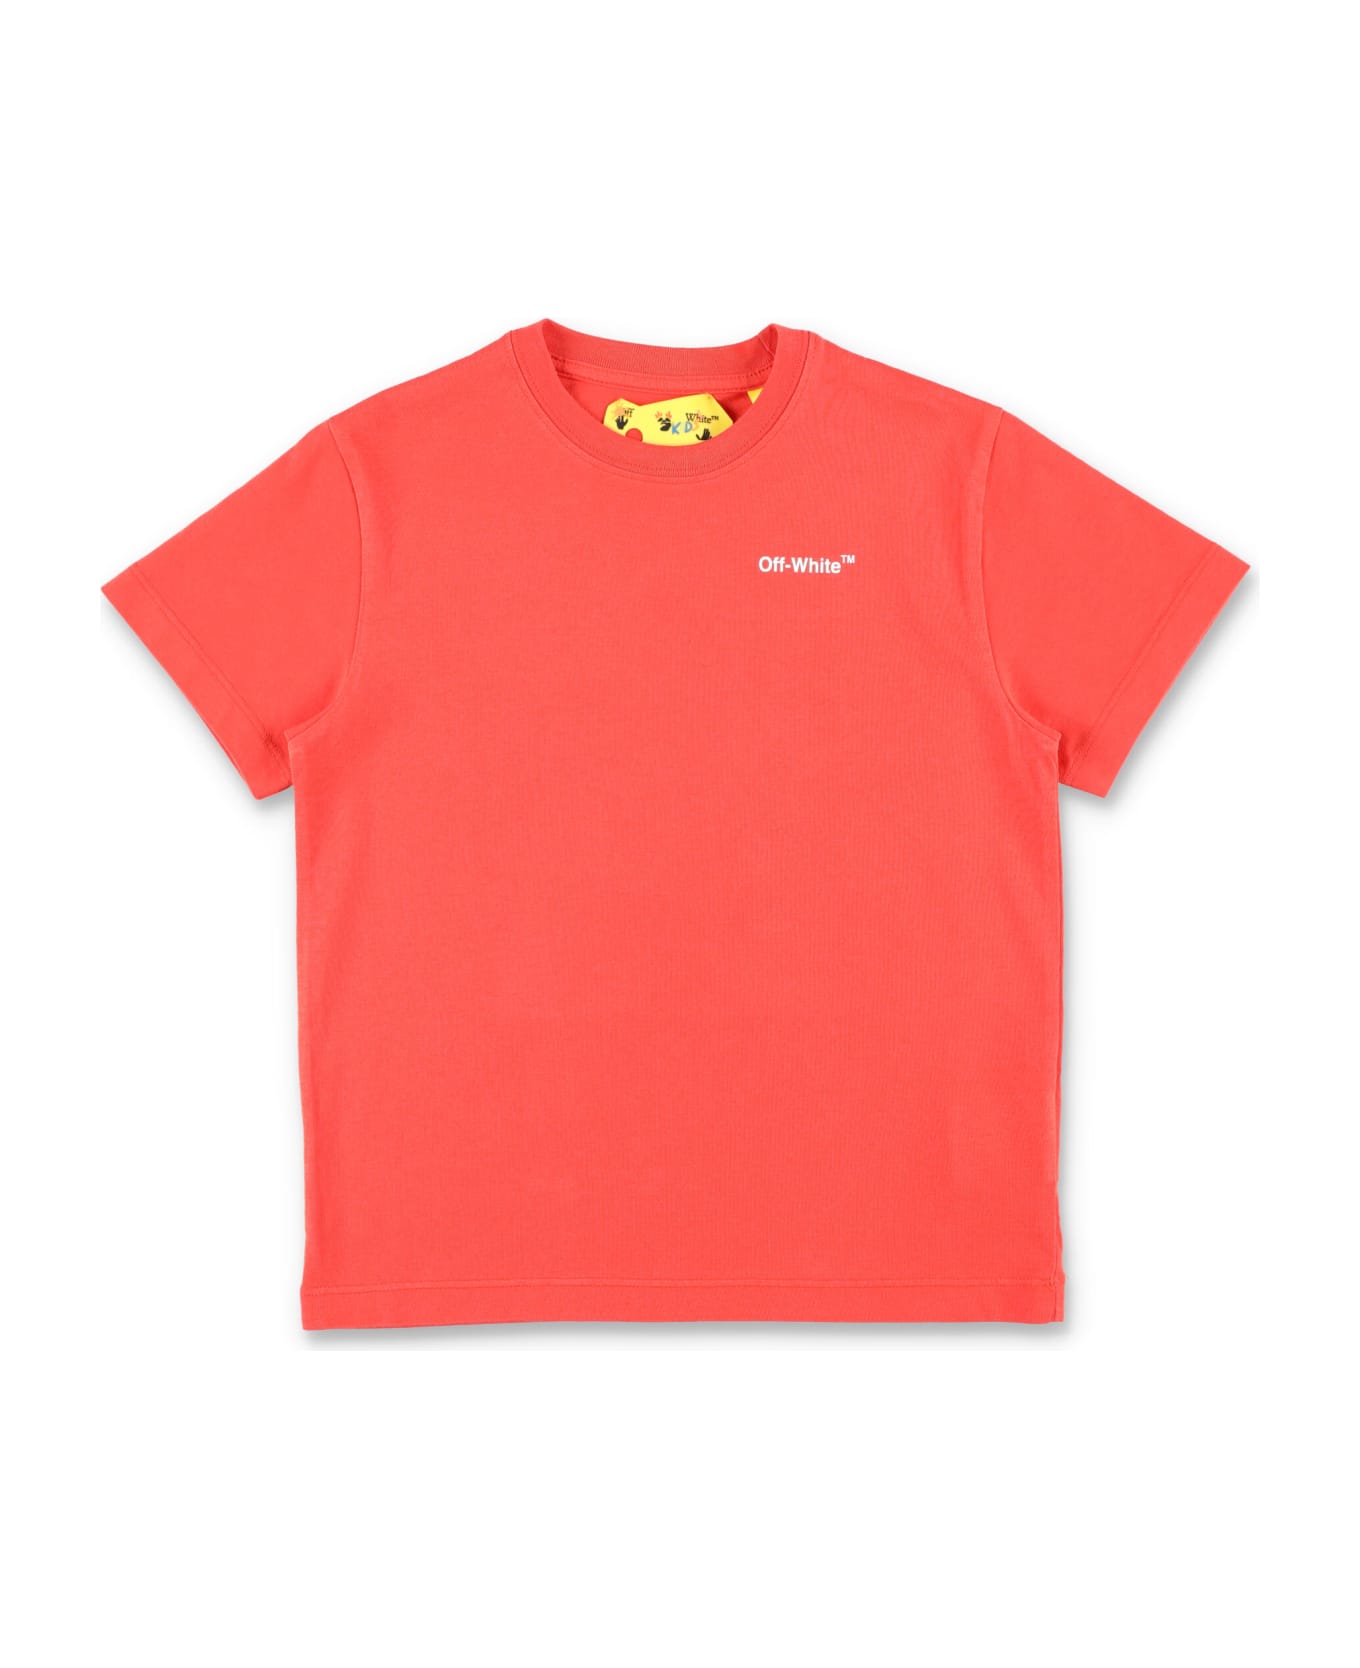 Off-White Rubber Arrow S/s Tee - RED WHITE